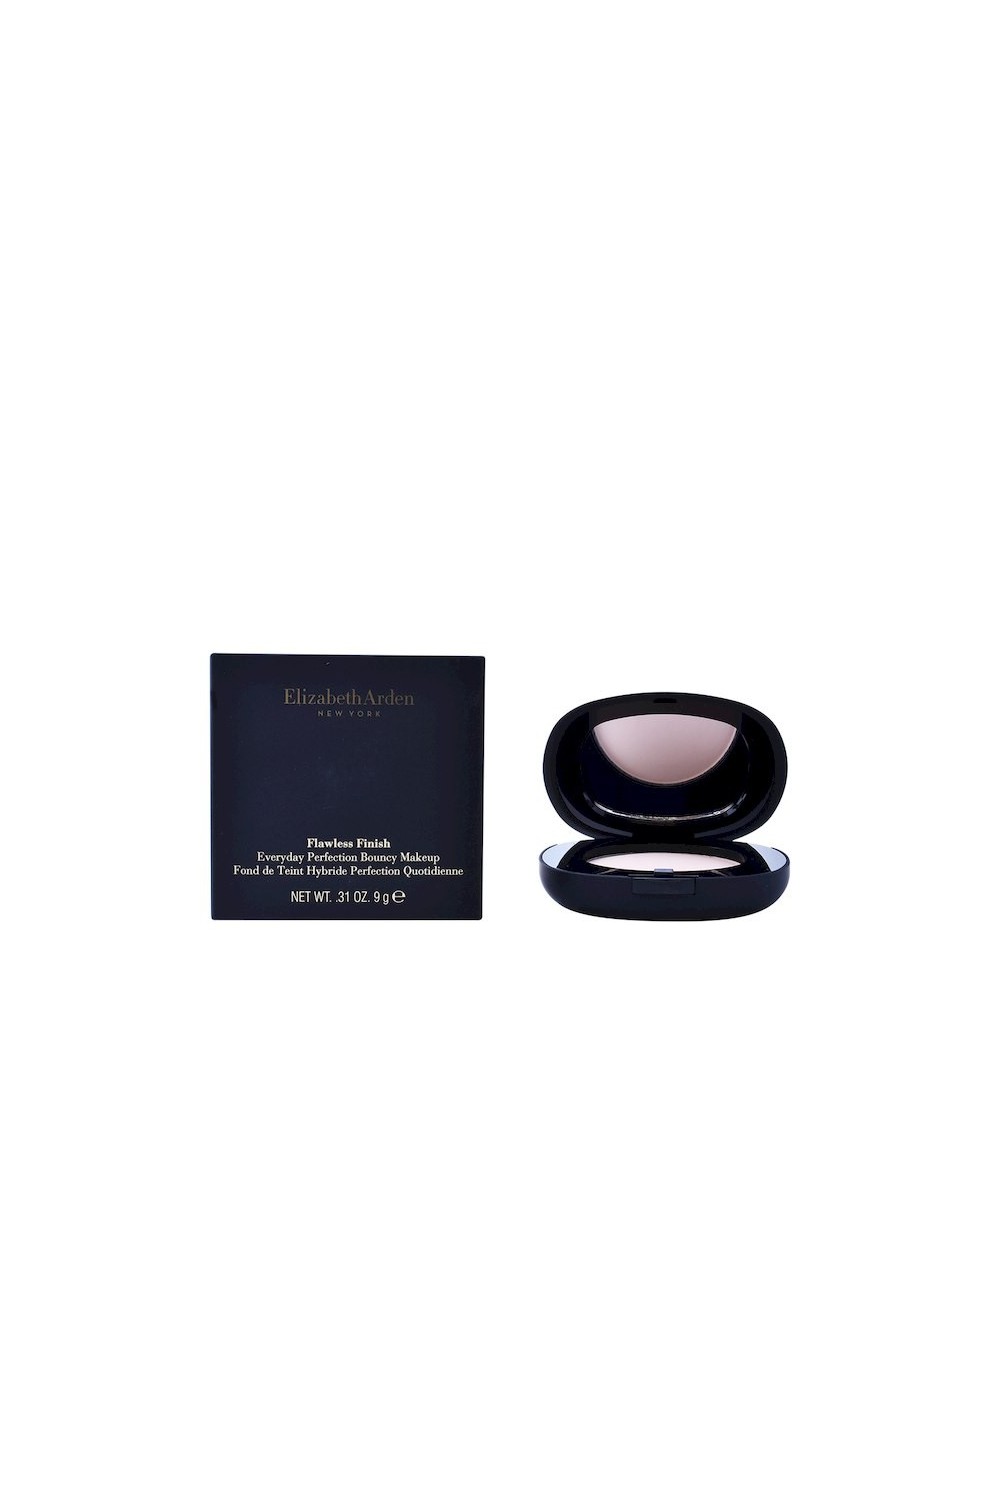 Elizabeth Arden Flawless Finish Everyday Perfection Bouncy Makeup 01 Porcelain 9g